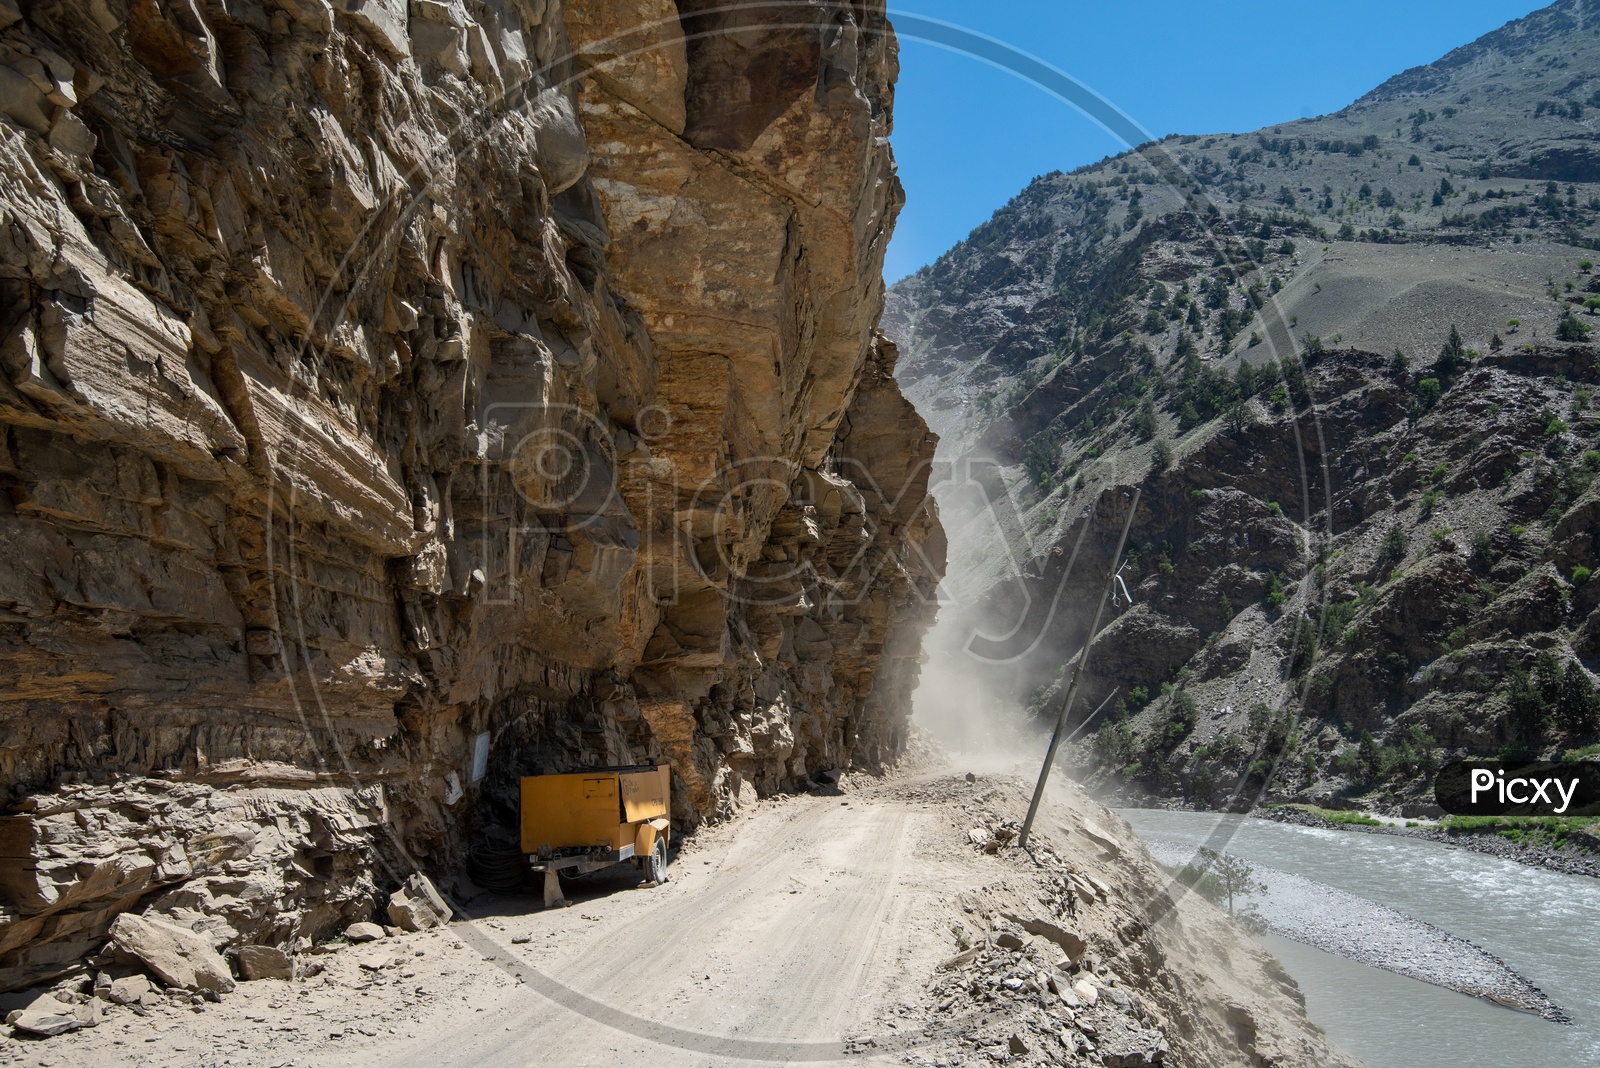 Construction work in Spiti Valley